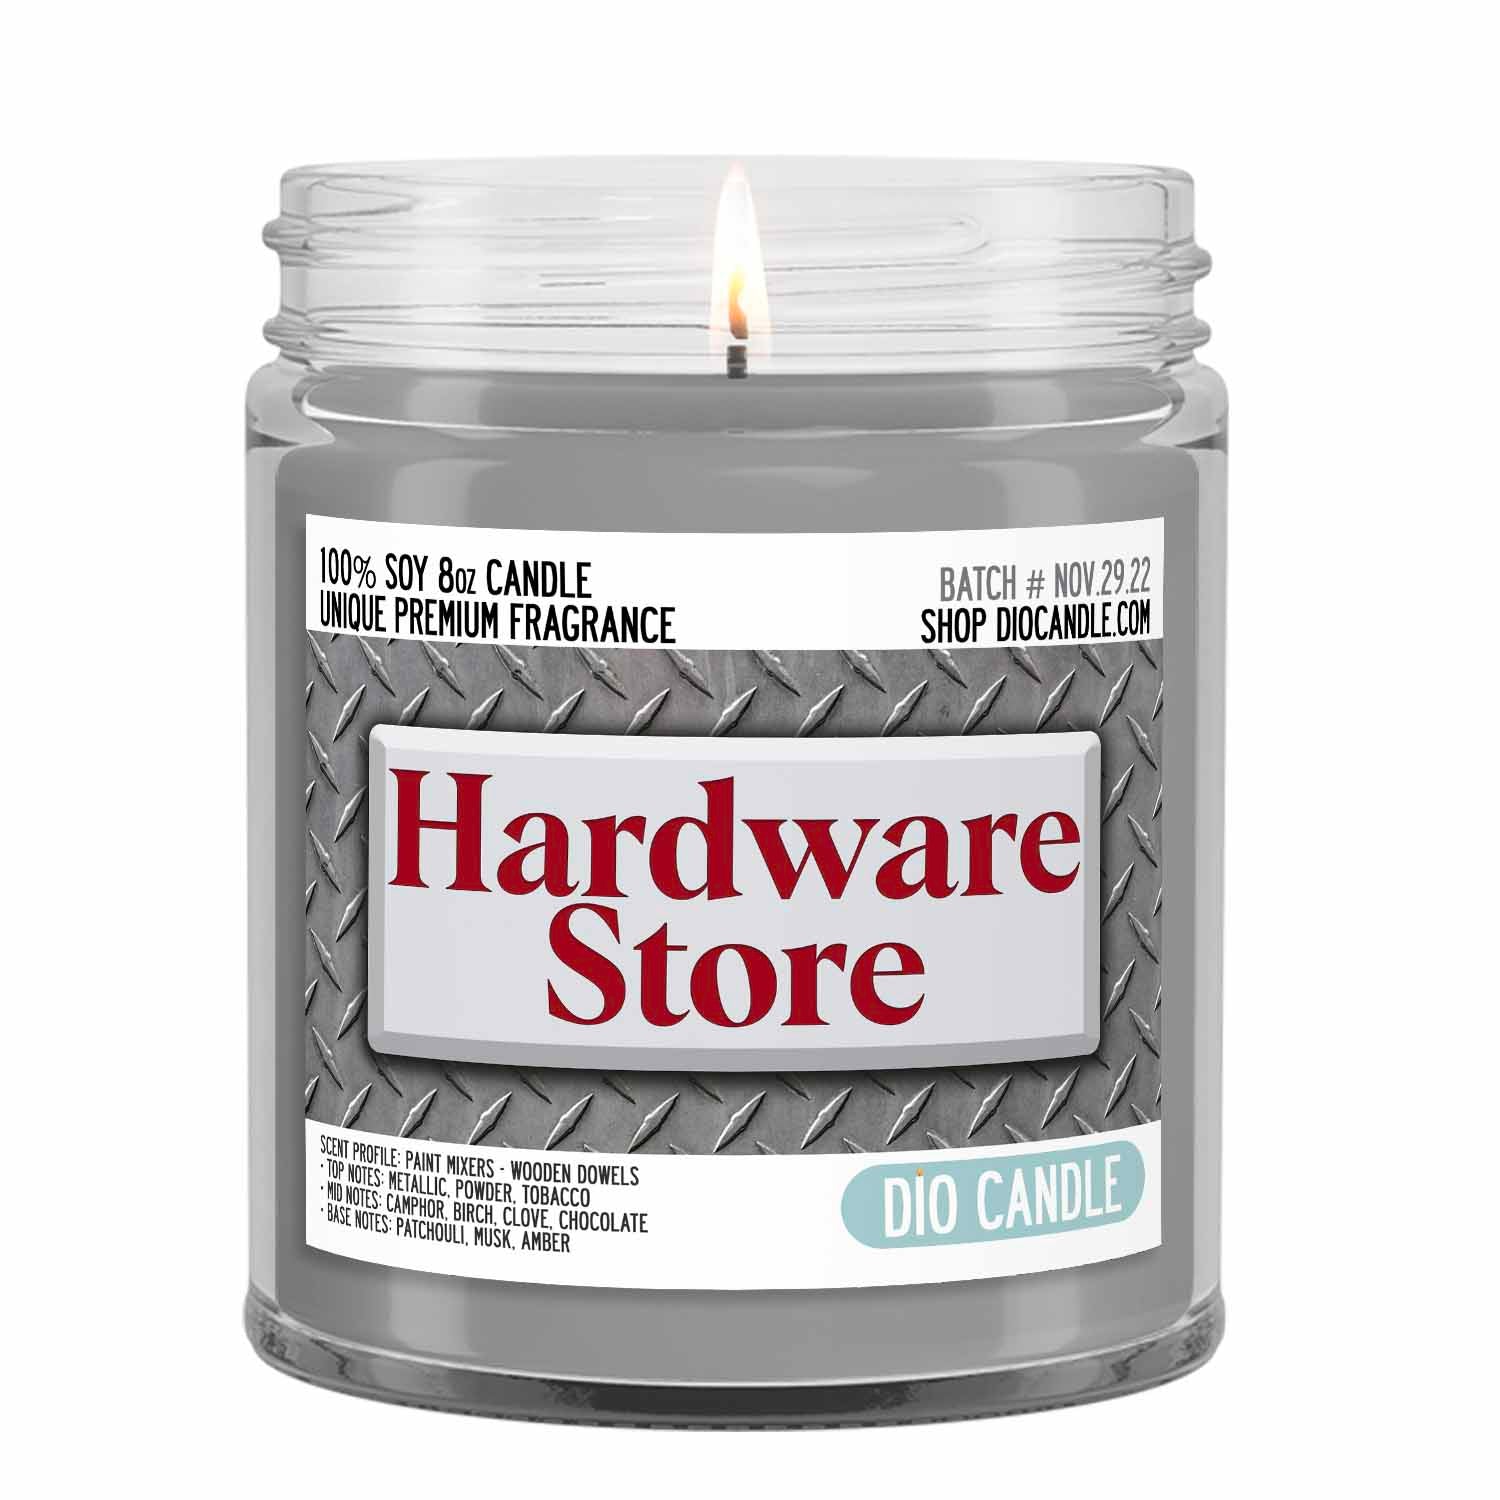 Hardware Store Candle - Paint Mixers - Wooden Dowels - Dust